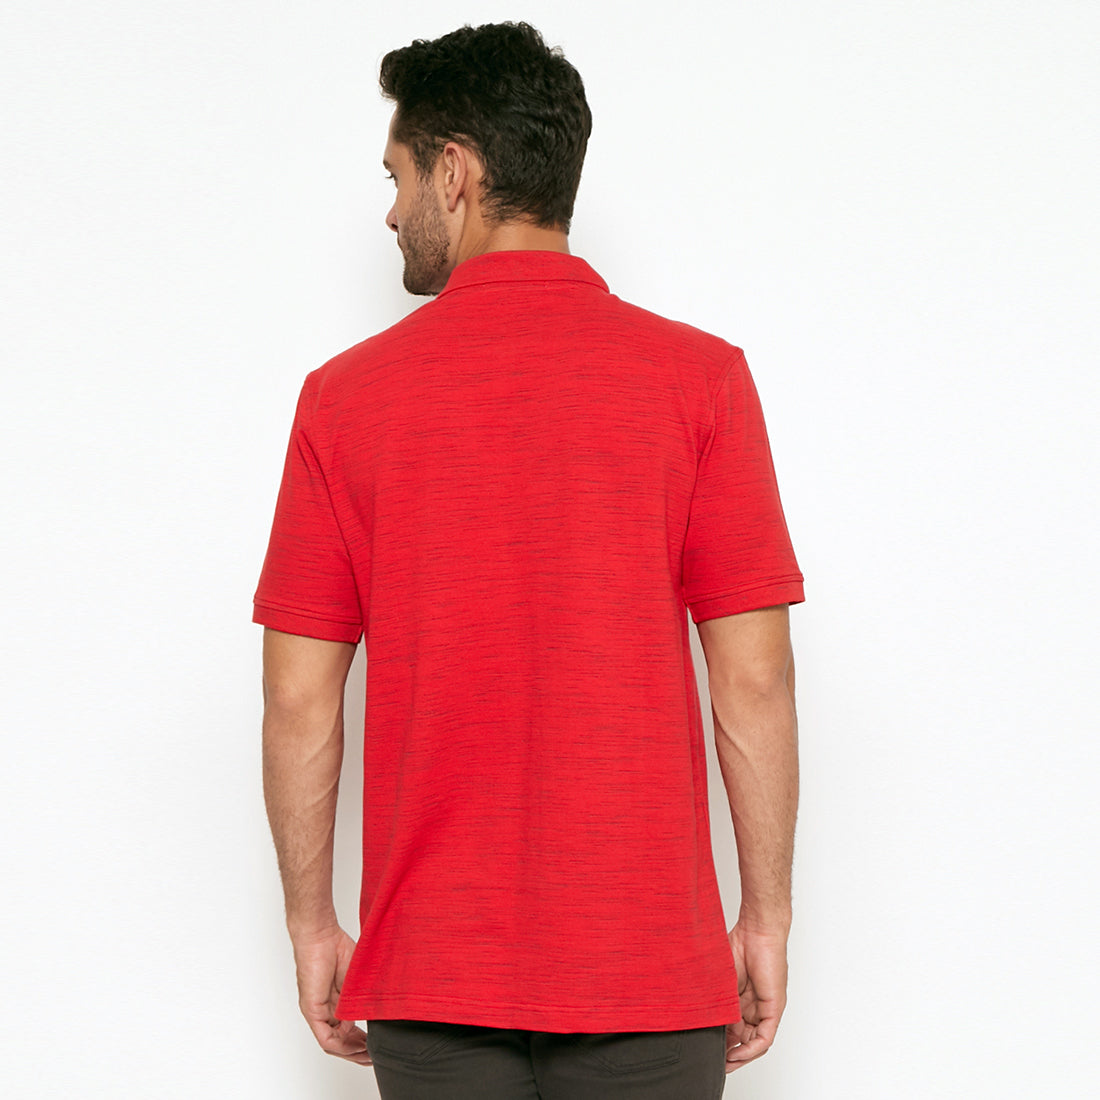 Carvil Polo Pria LAMBO-RED RED